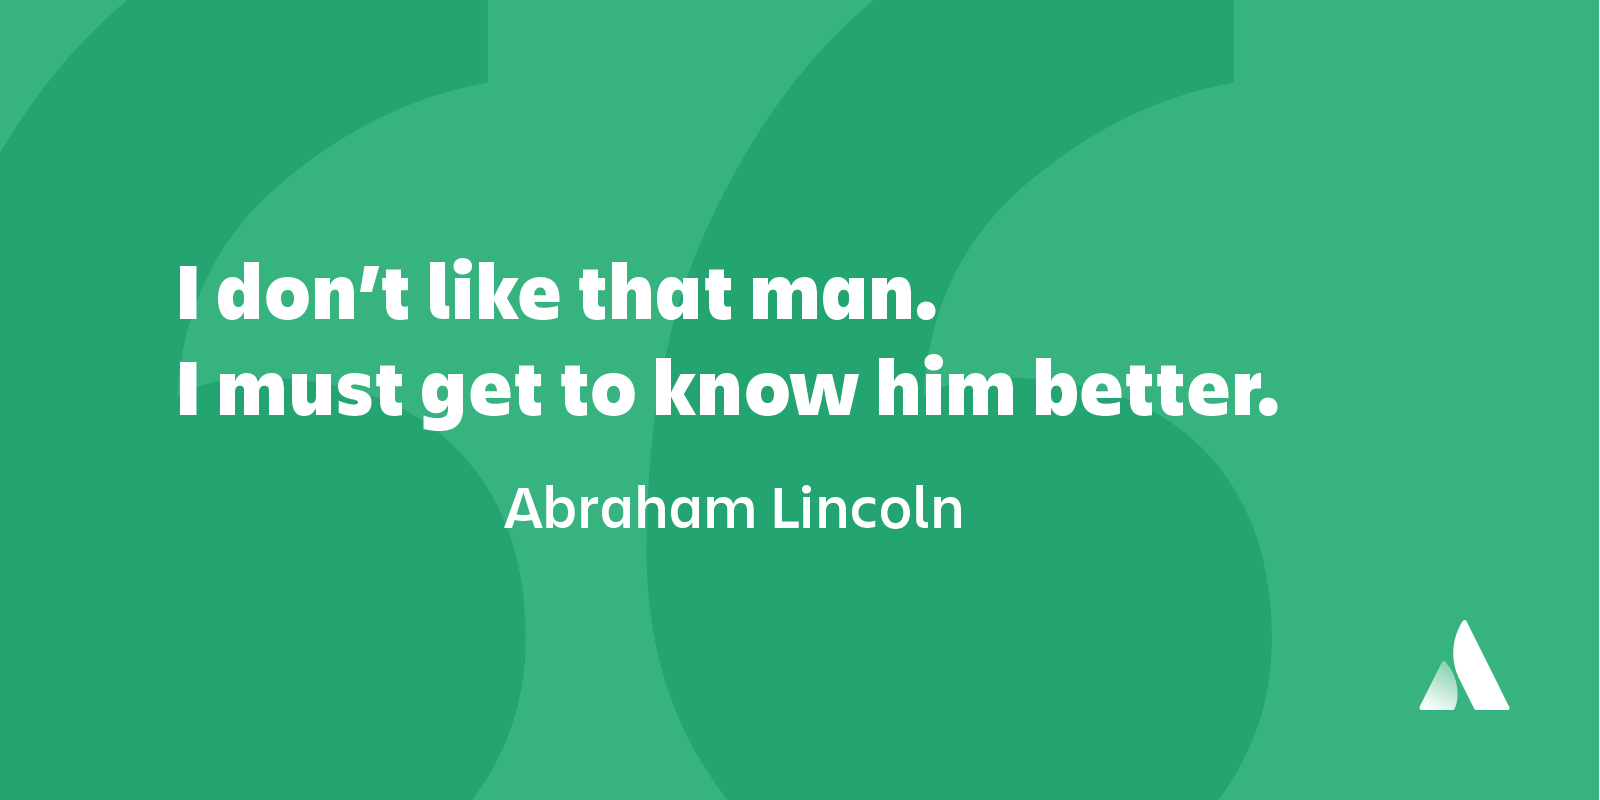 teamwork quotes I don't like that man I must get to know him better Abraham Lincoln